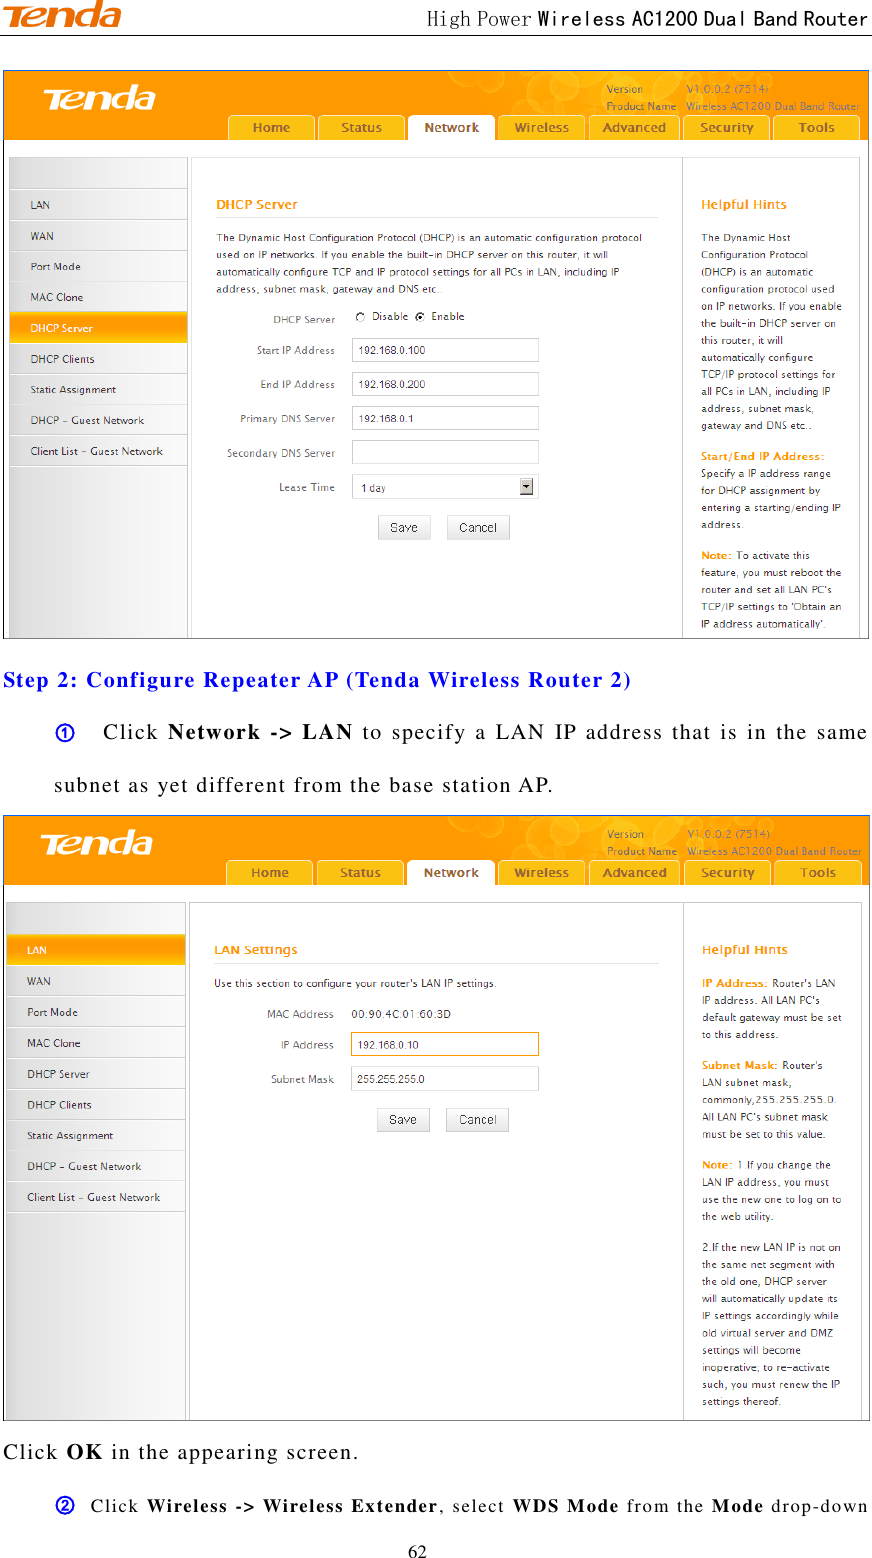                                             High Power Wireless AC1200 Dual Band Router 62  Step 2: Configure Repeater AP (Tenda Wireless Router 2) ①   Click Network -&gt; LAN  to specify a  LAN  IP  address that is  in  the same subnet as yet different from the base station AP.  Click OK in the appearing screen. ② Click  Wireless -&gt; Wireless Extender, select WDS Mode from the Mode drop-down 